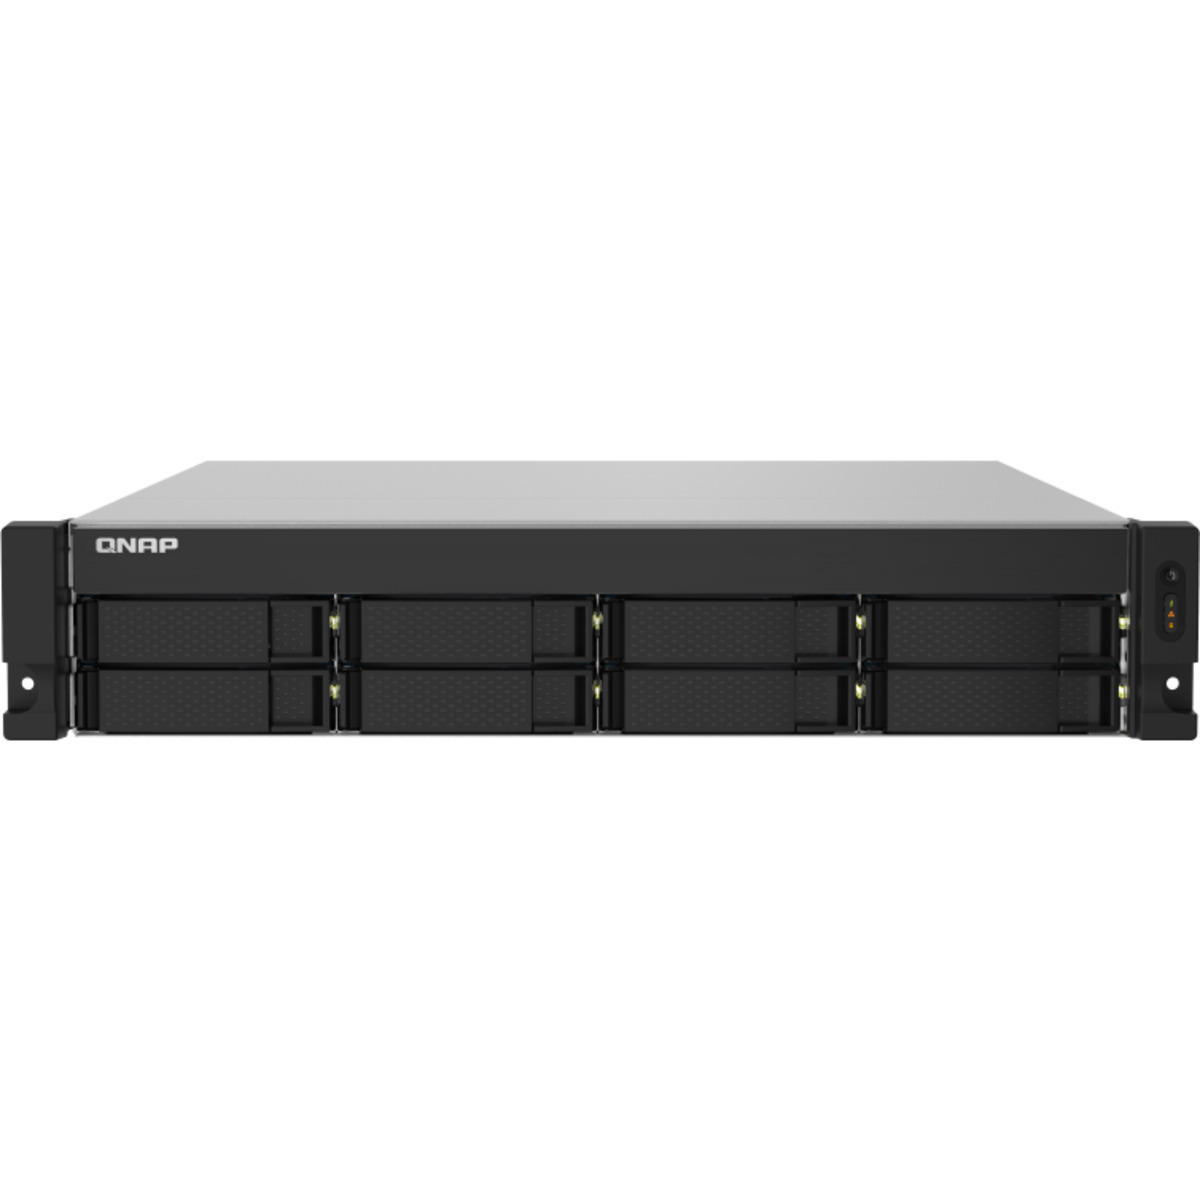 QNAP TS-832PXU-RP 20tb 8-Bay RackMount Personal / Basic Home / Small Office NAS - Network Attached Storage Device 5x4tb Samsung 870 QVO MZ-77Q4T0 2.5 560/530MB/s SATA 6Gb/s SSD CONSUMER Class Drives Installed - Burn-In Tested - FREE RAM UPGRADE TS-832PXU-RP